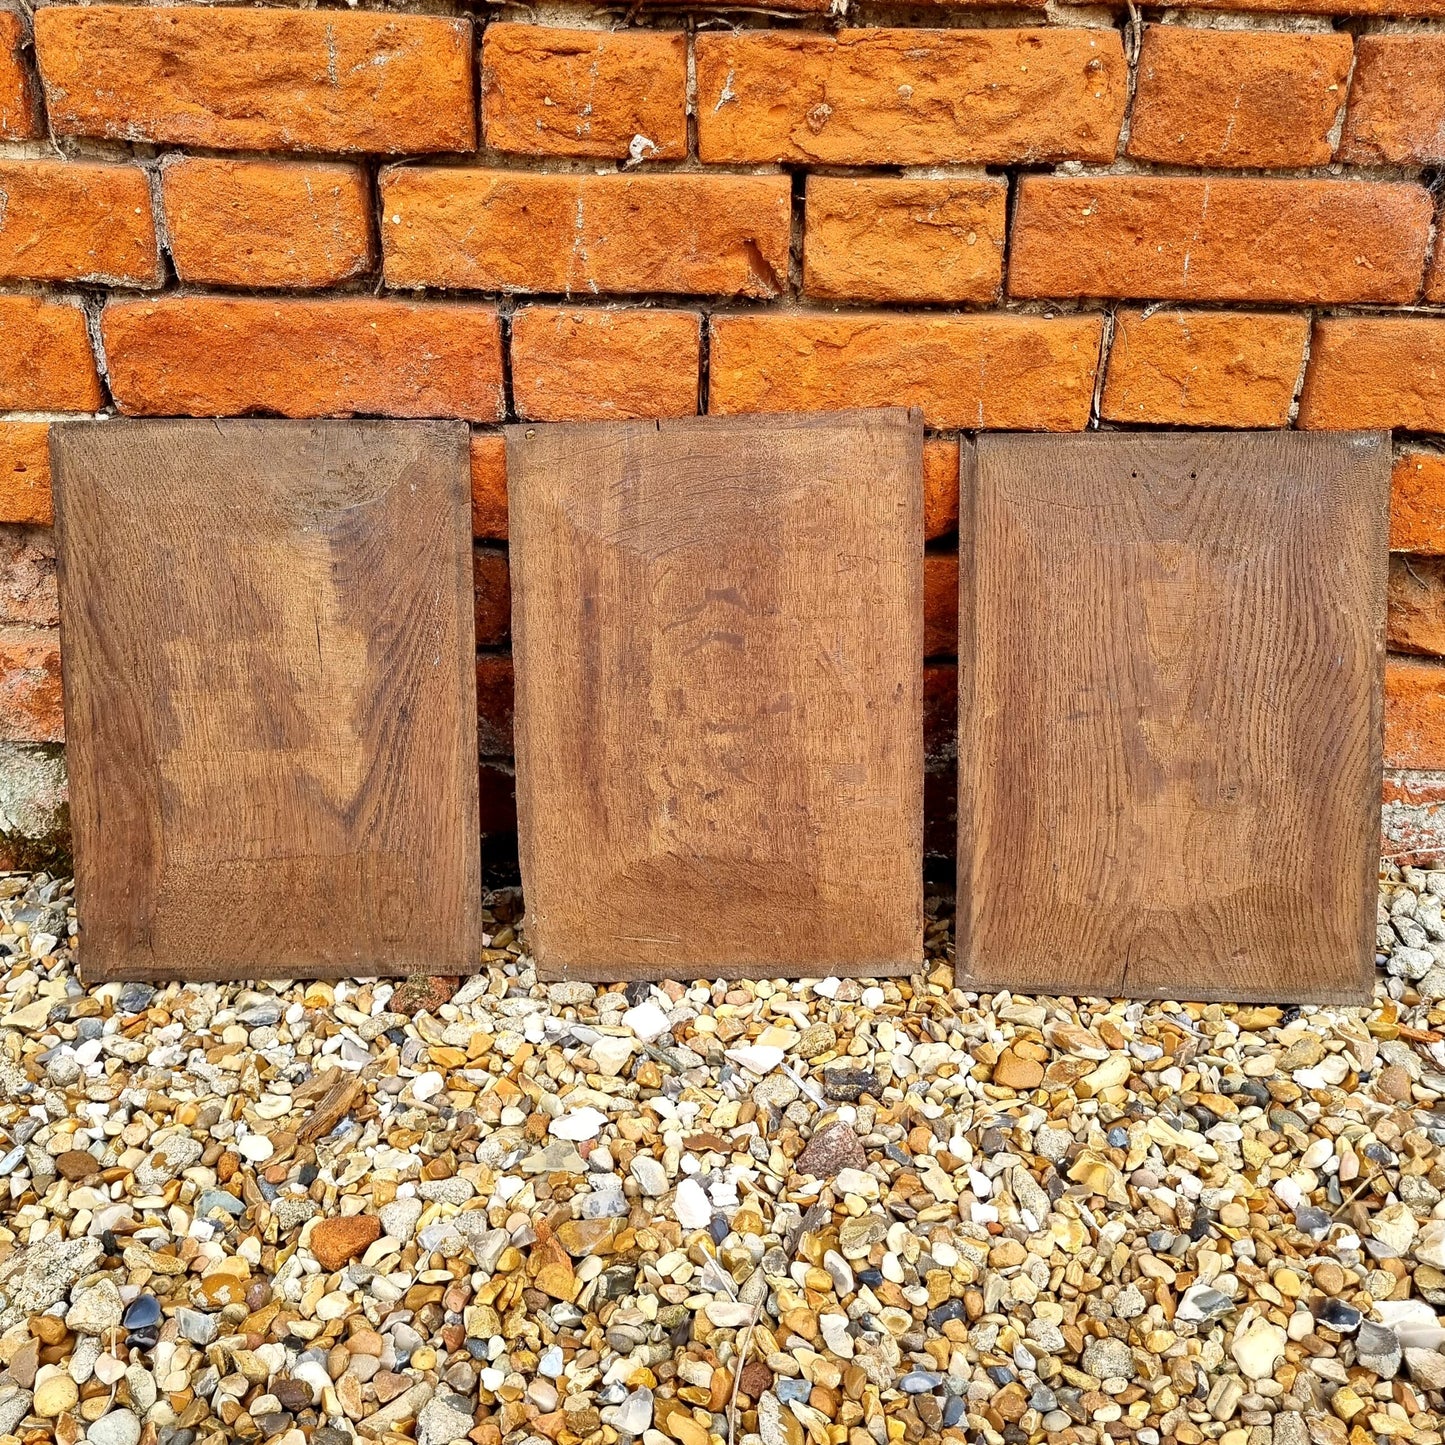 Set of 3 x 16thC English Antique Carved Oak Panels with Traces of Original Polychrome